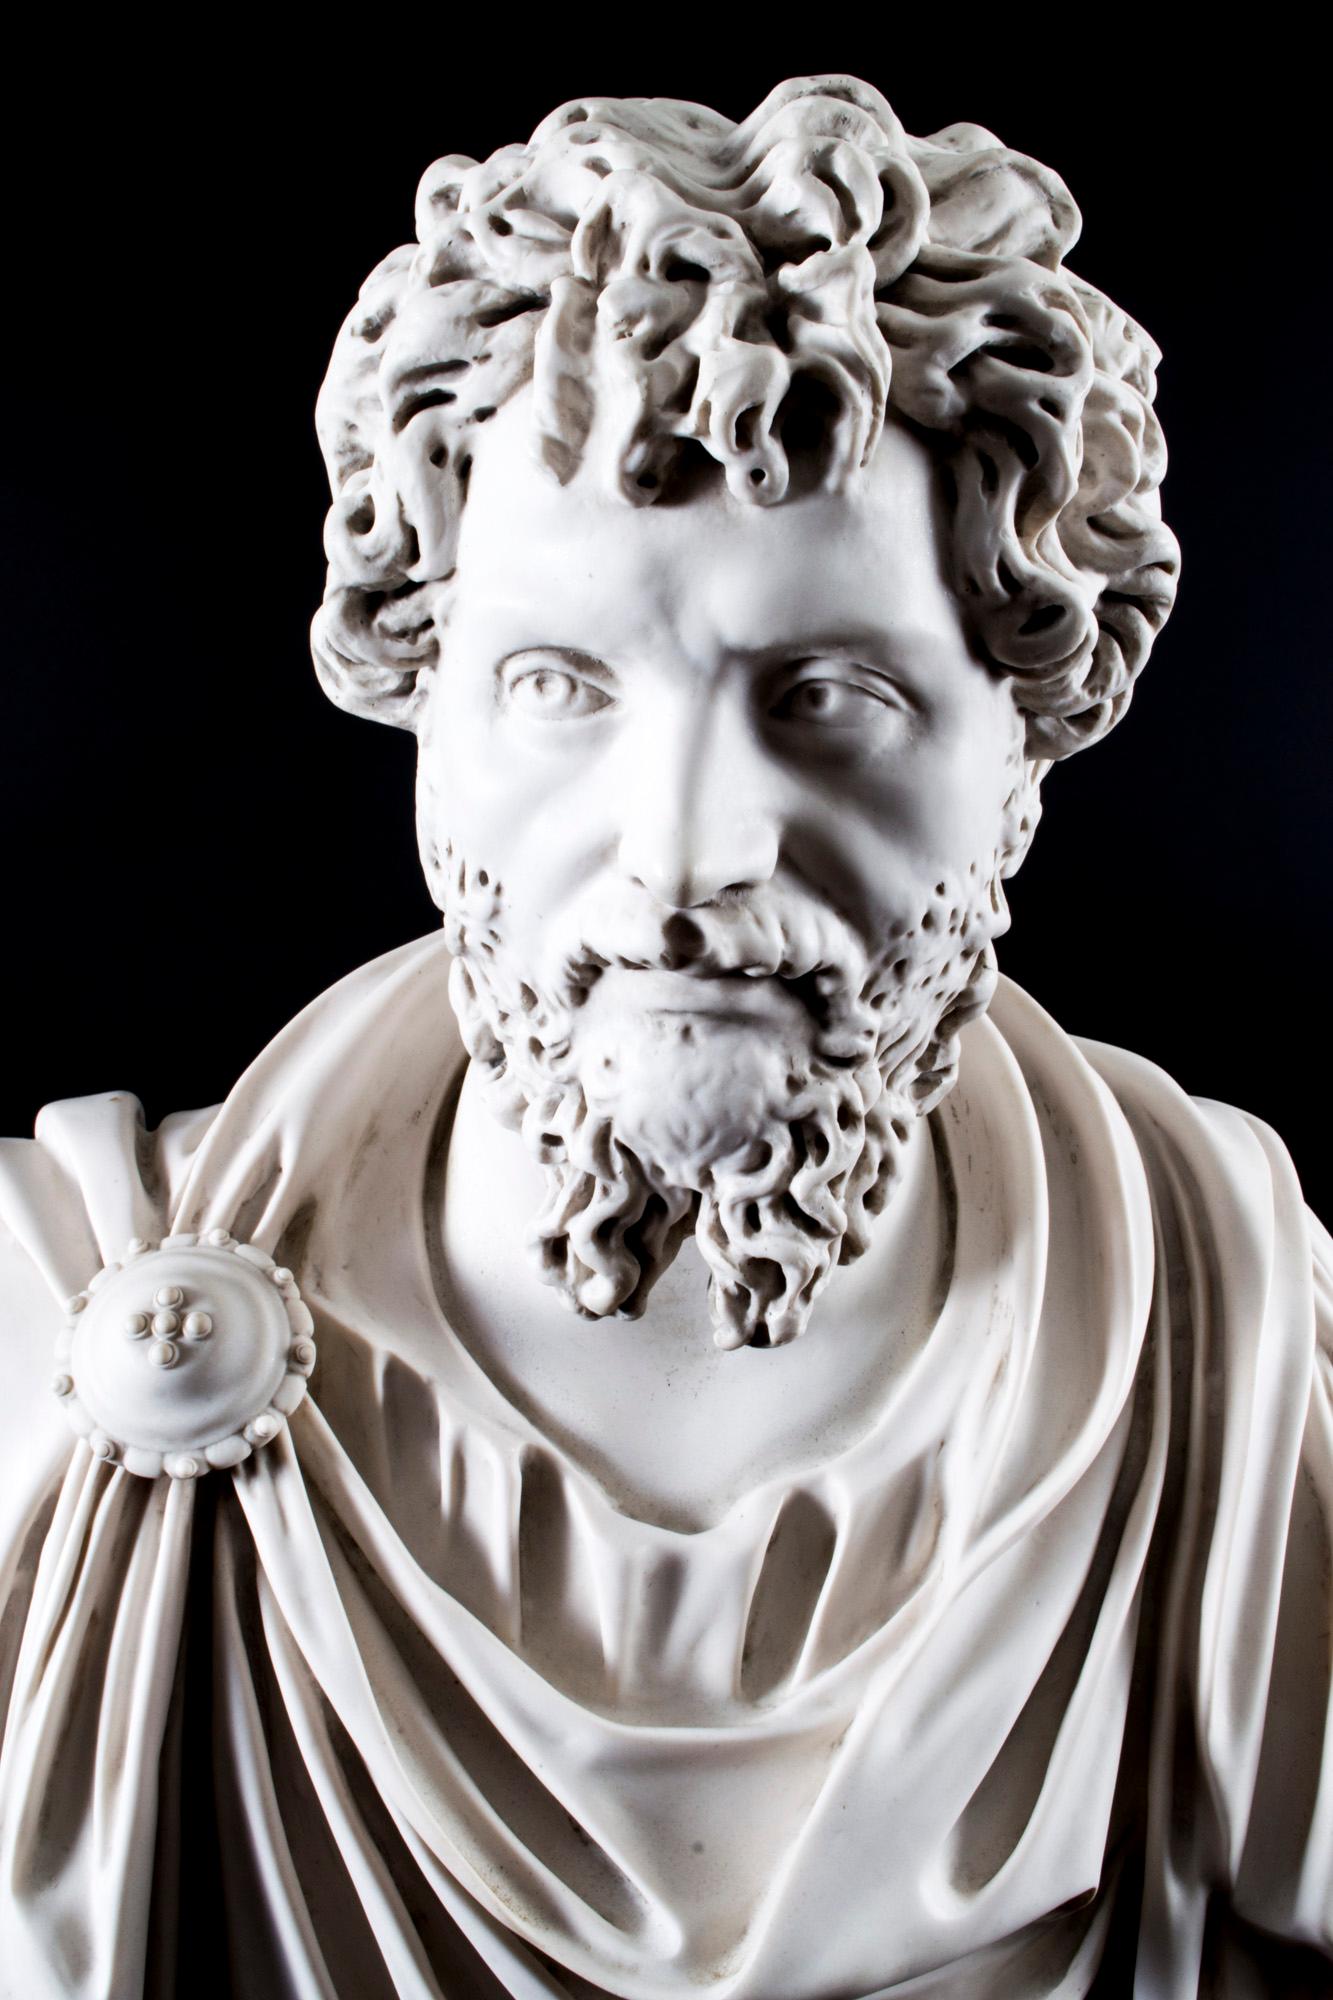 A beautifully sculpted marble bust of the famous Roman Emperor Septimus Severus, dating from the last quarter of the 20th century.

The attention to detail throughout the piece is second to none and the figure is extremely lifelike.

This high